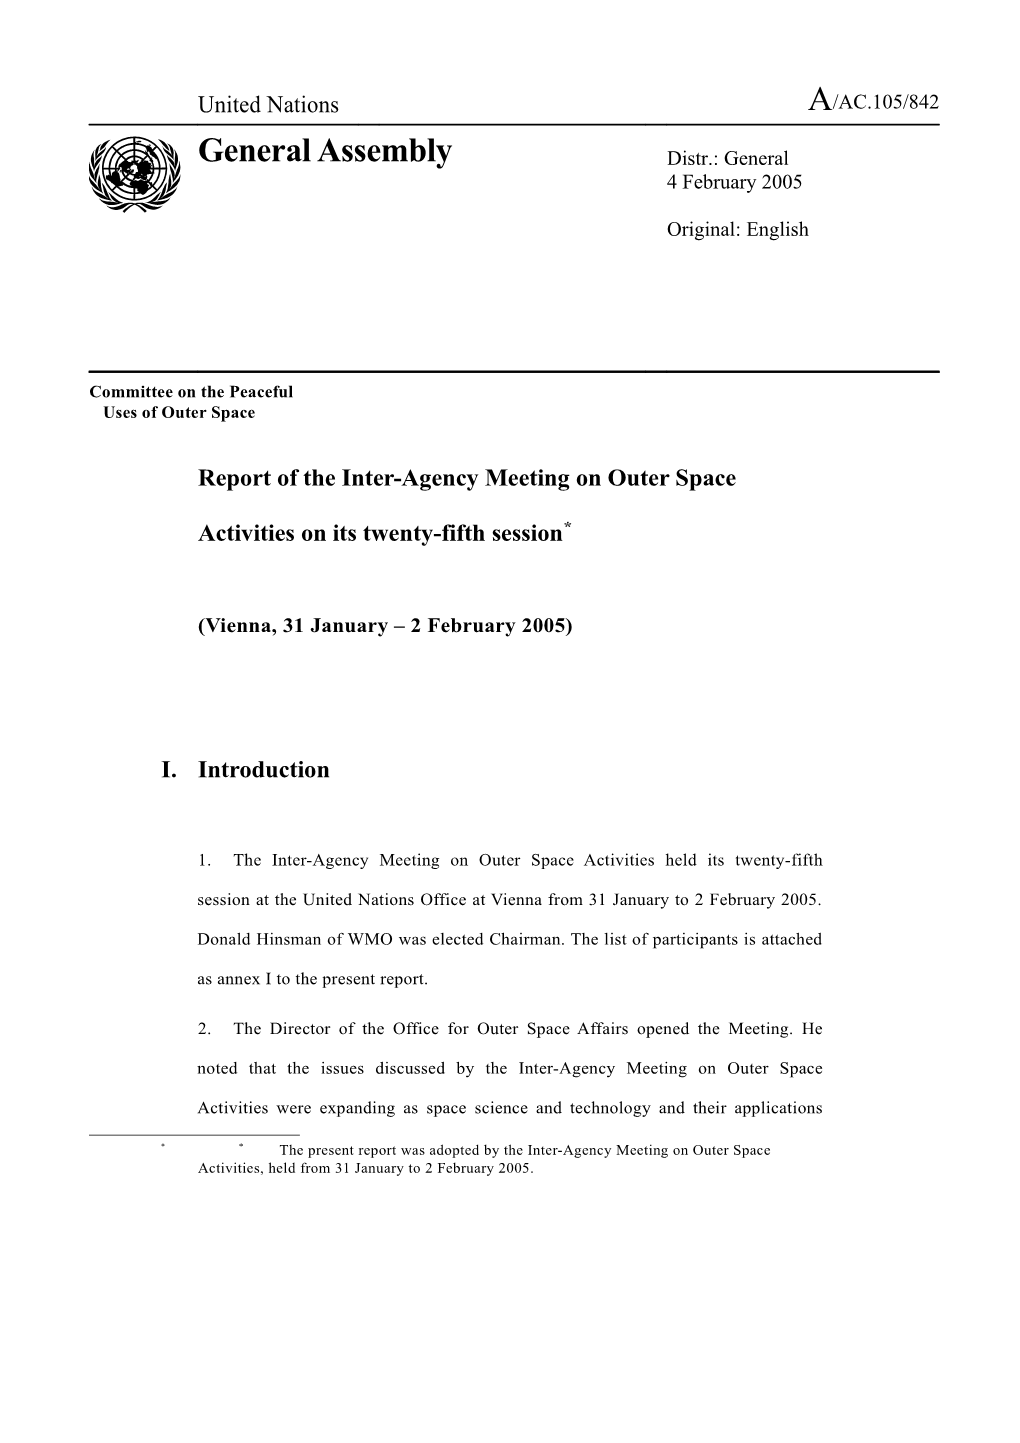 Report of the Inter-Agency Meeting on Outer Space Activities on Its Twenty-Fifth Session *